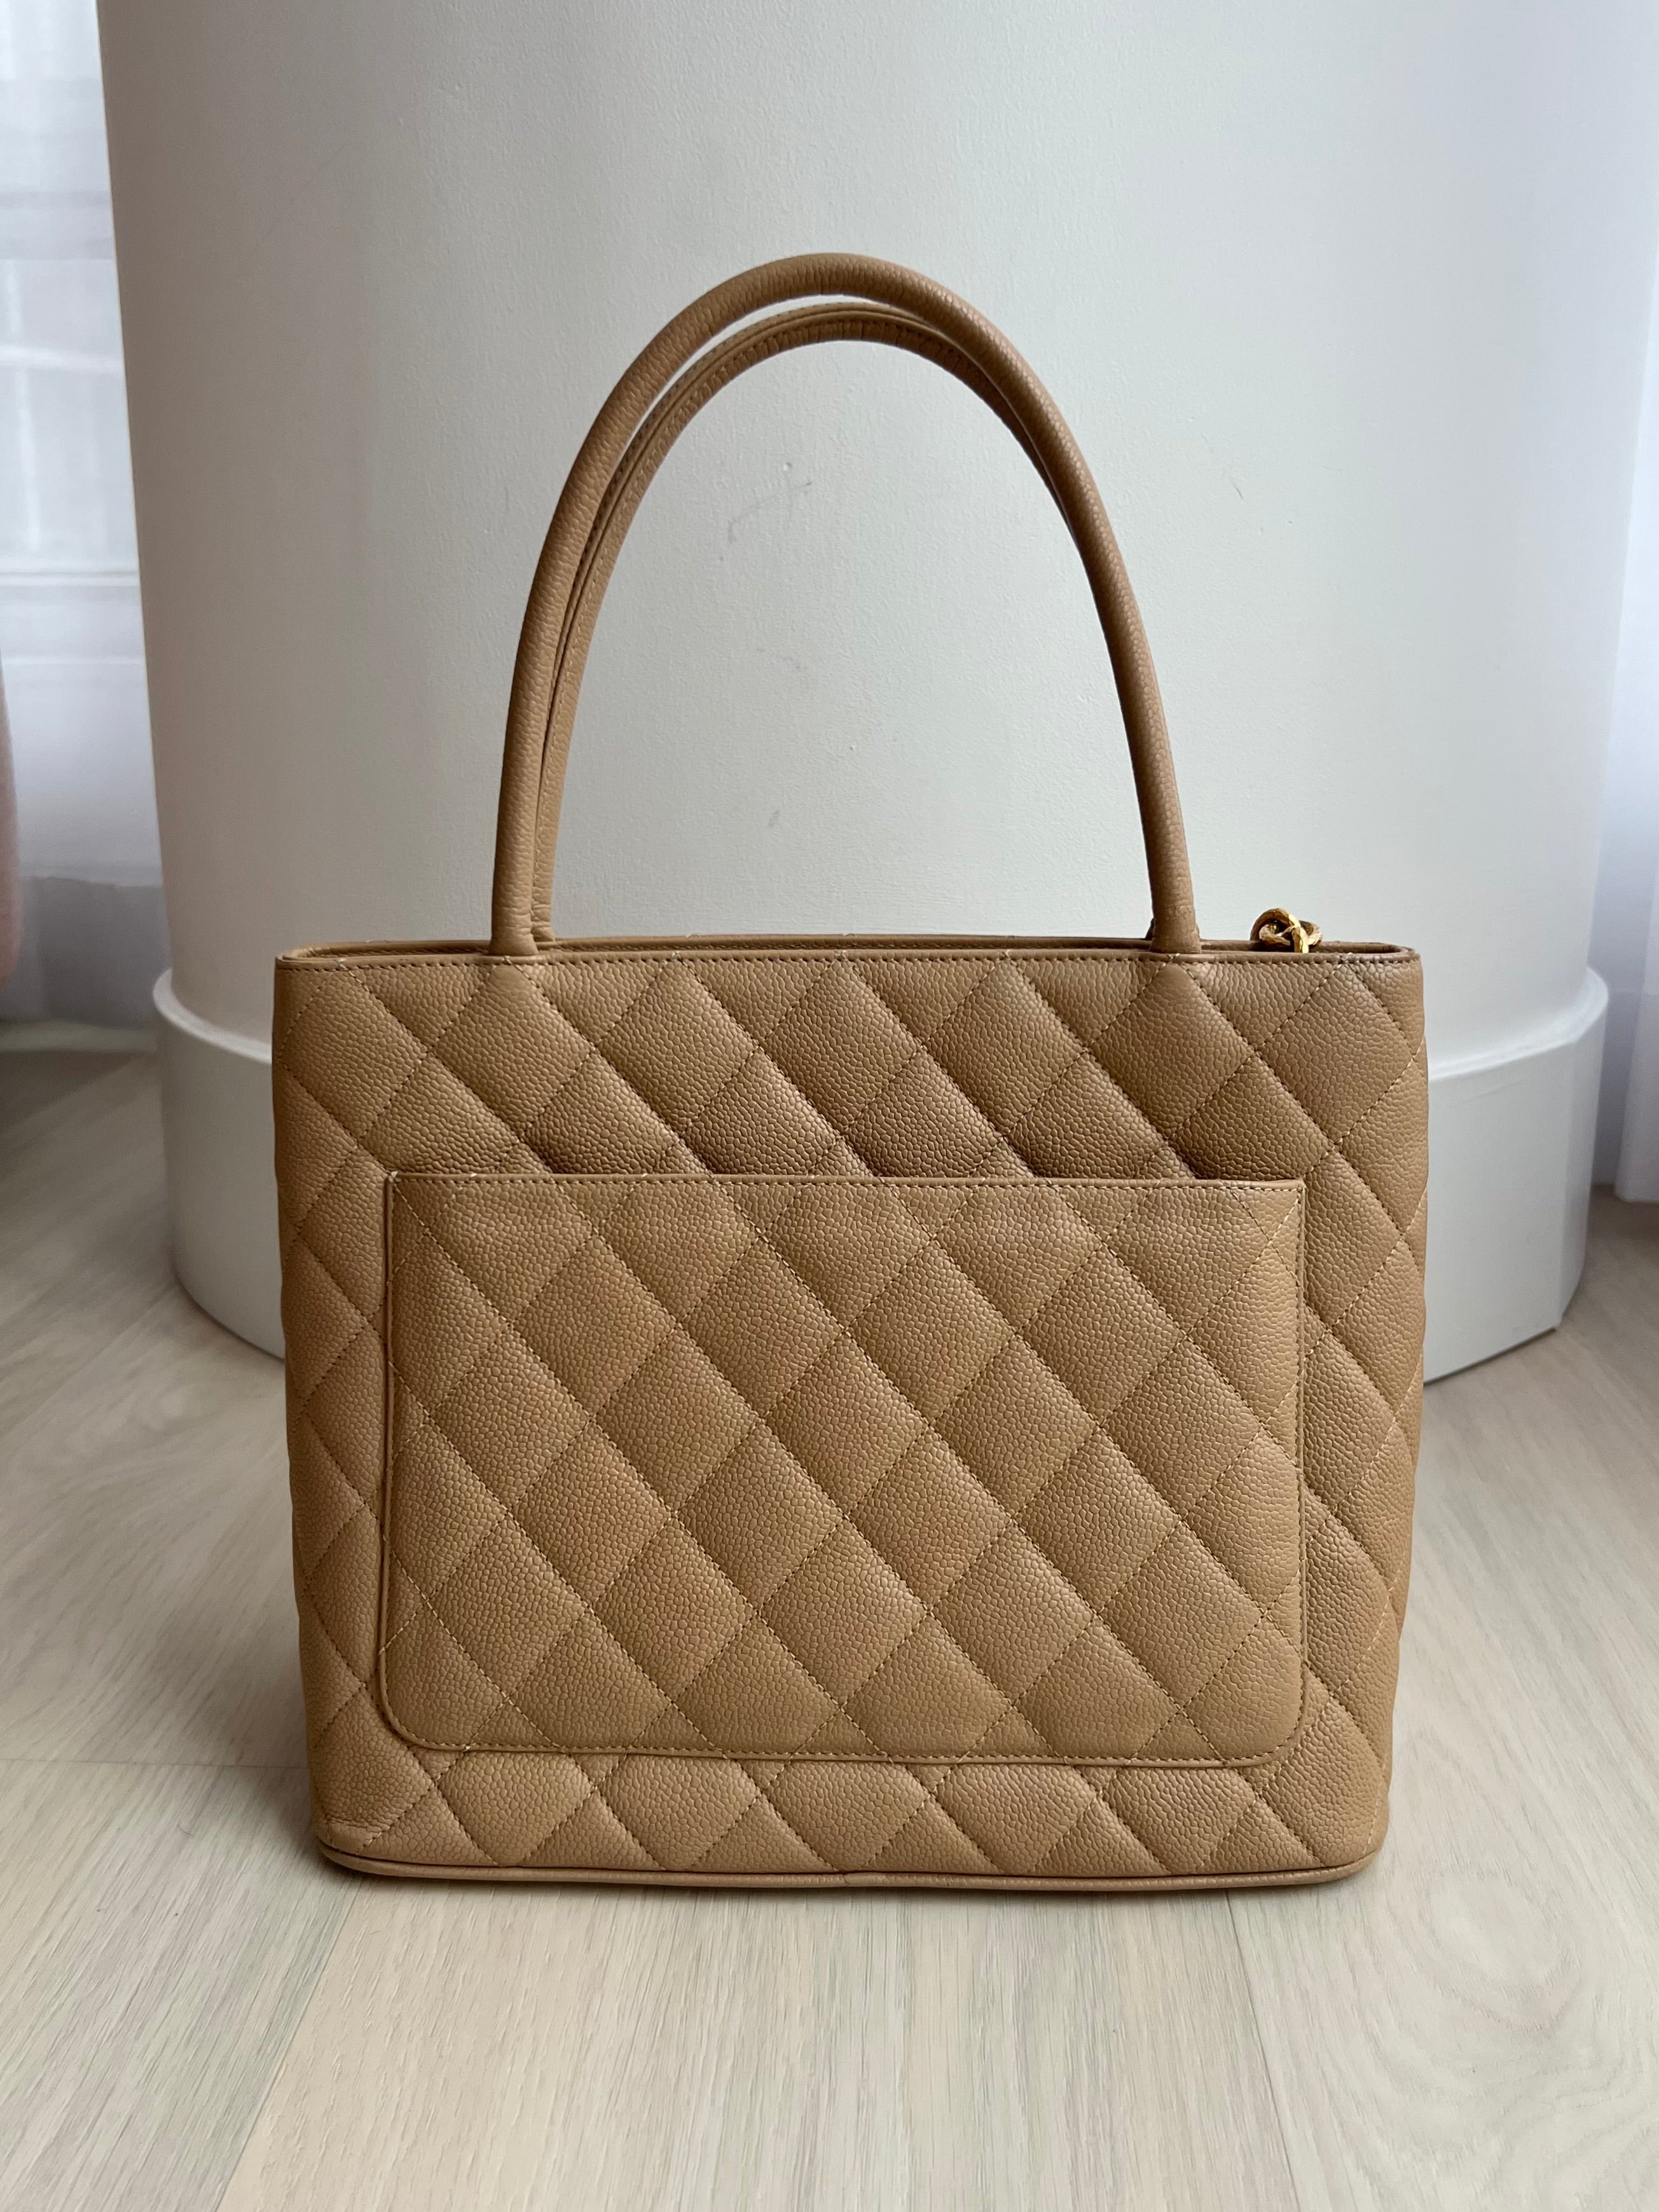 Chanel medallion tote – Beccas Bags